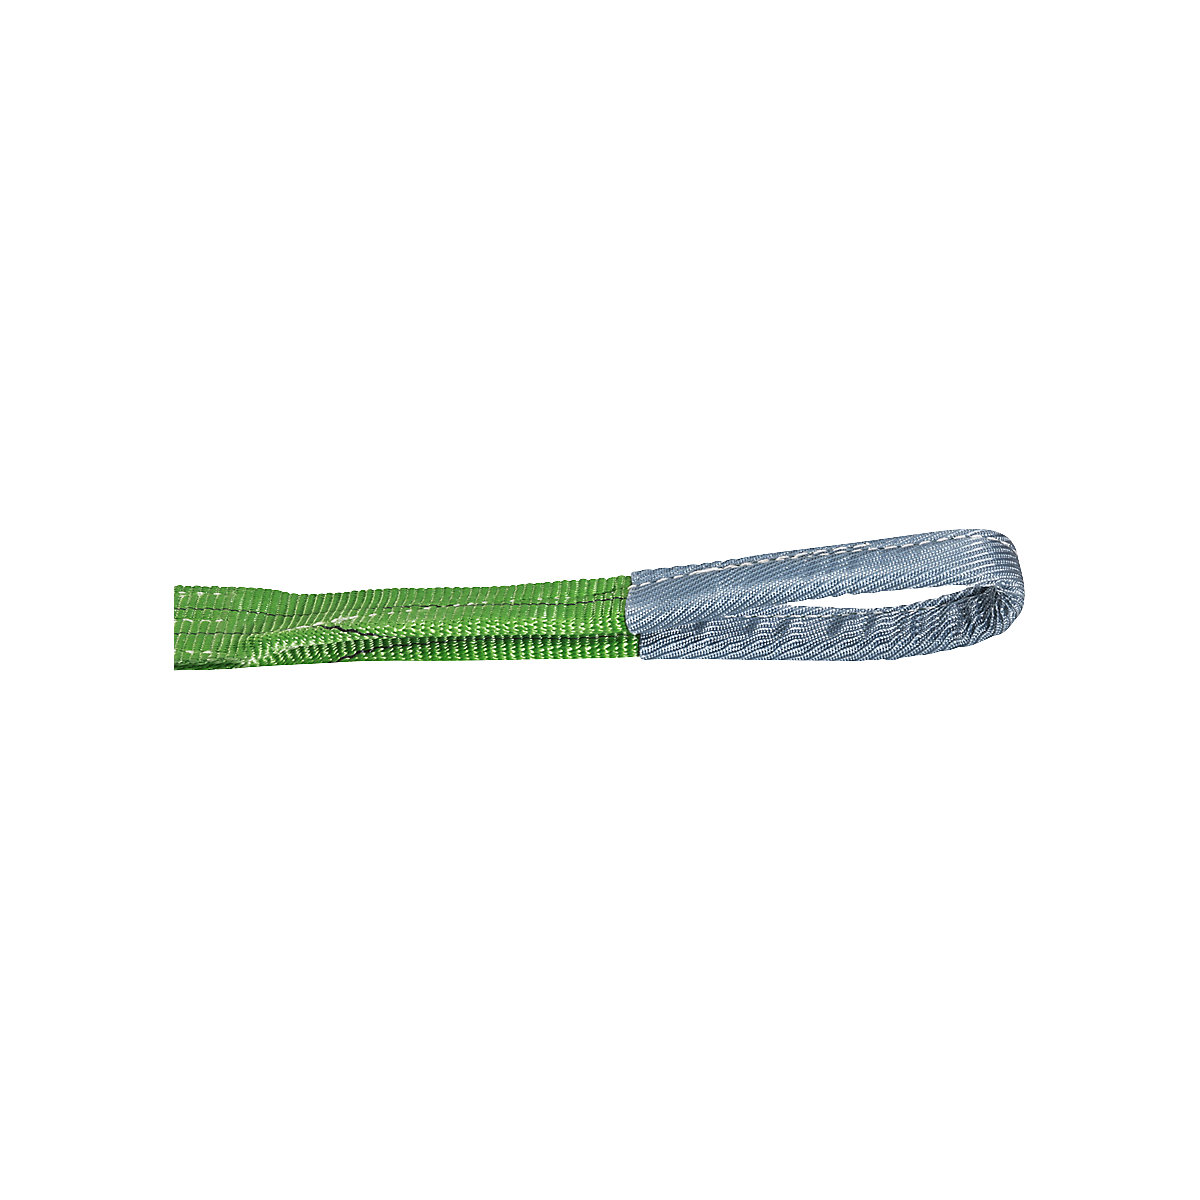 Lifting strap with 2 loops